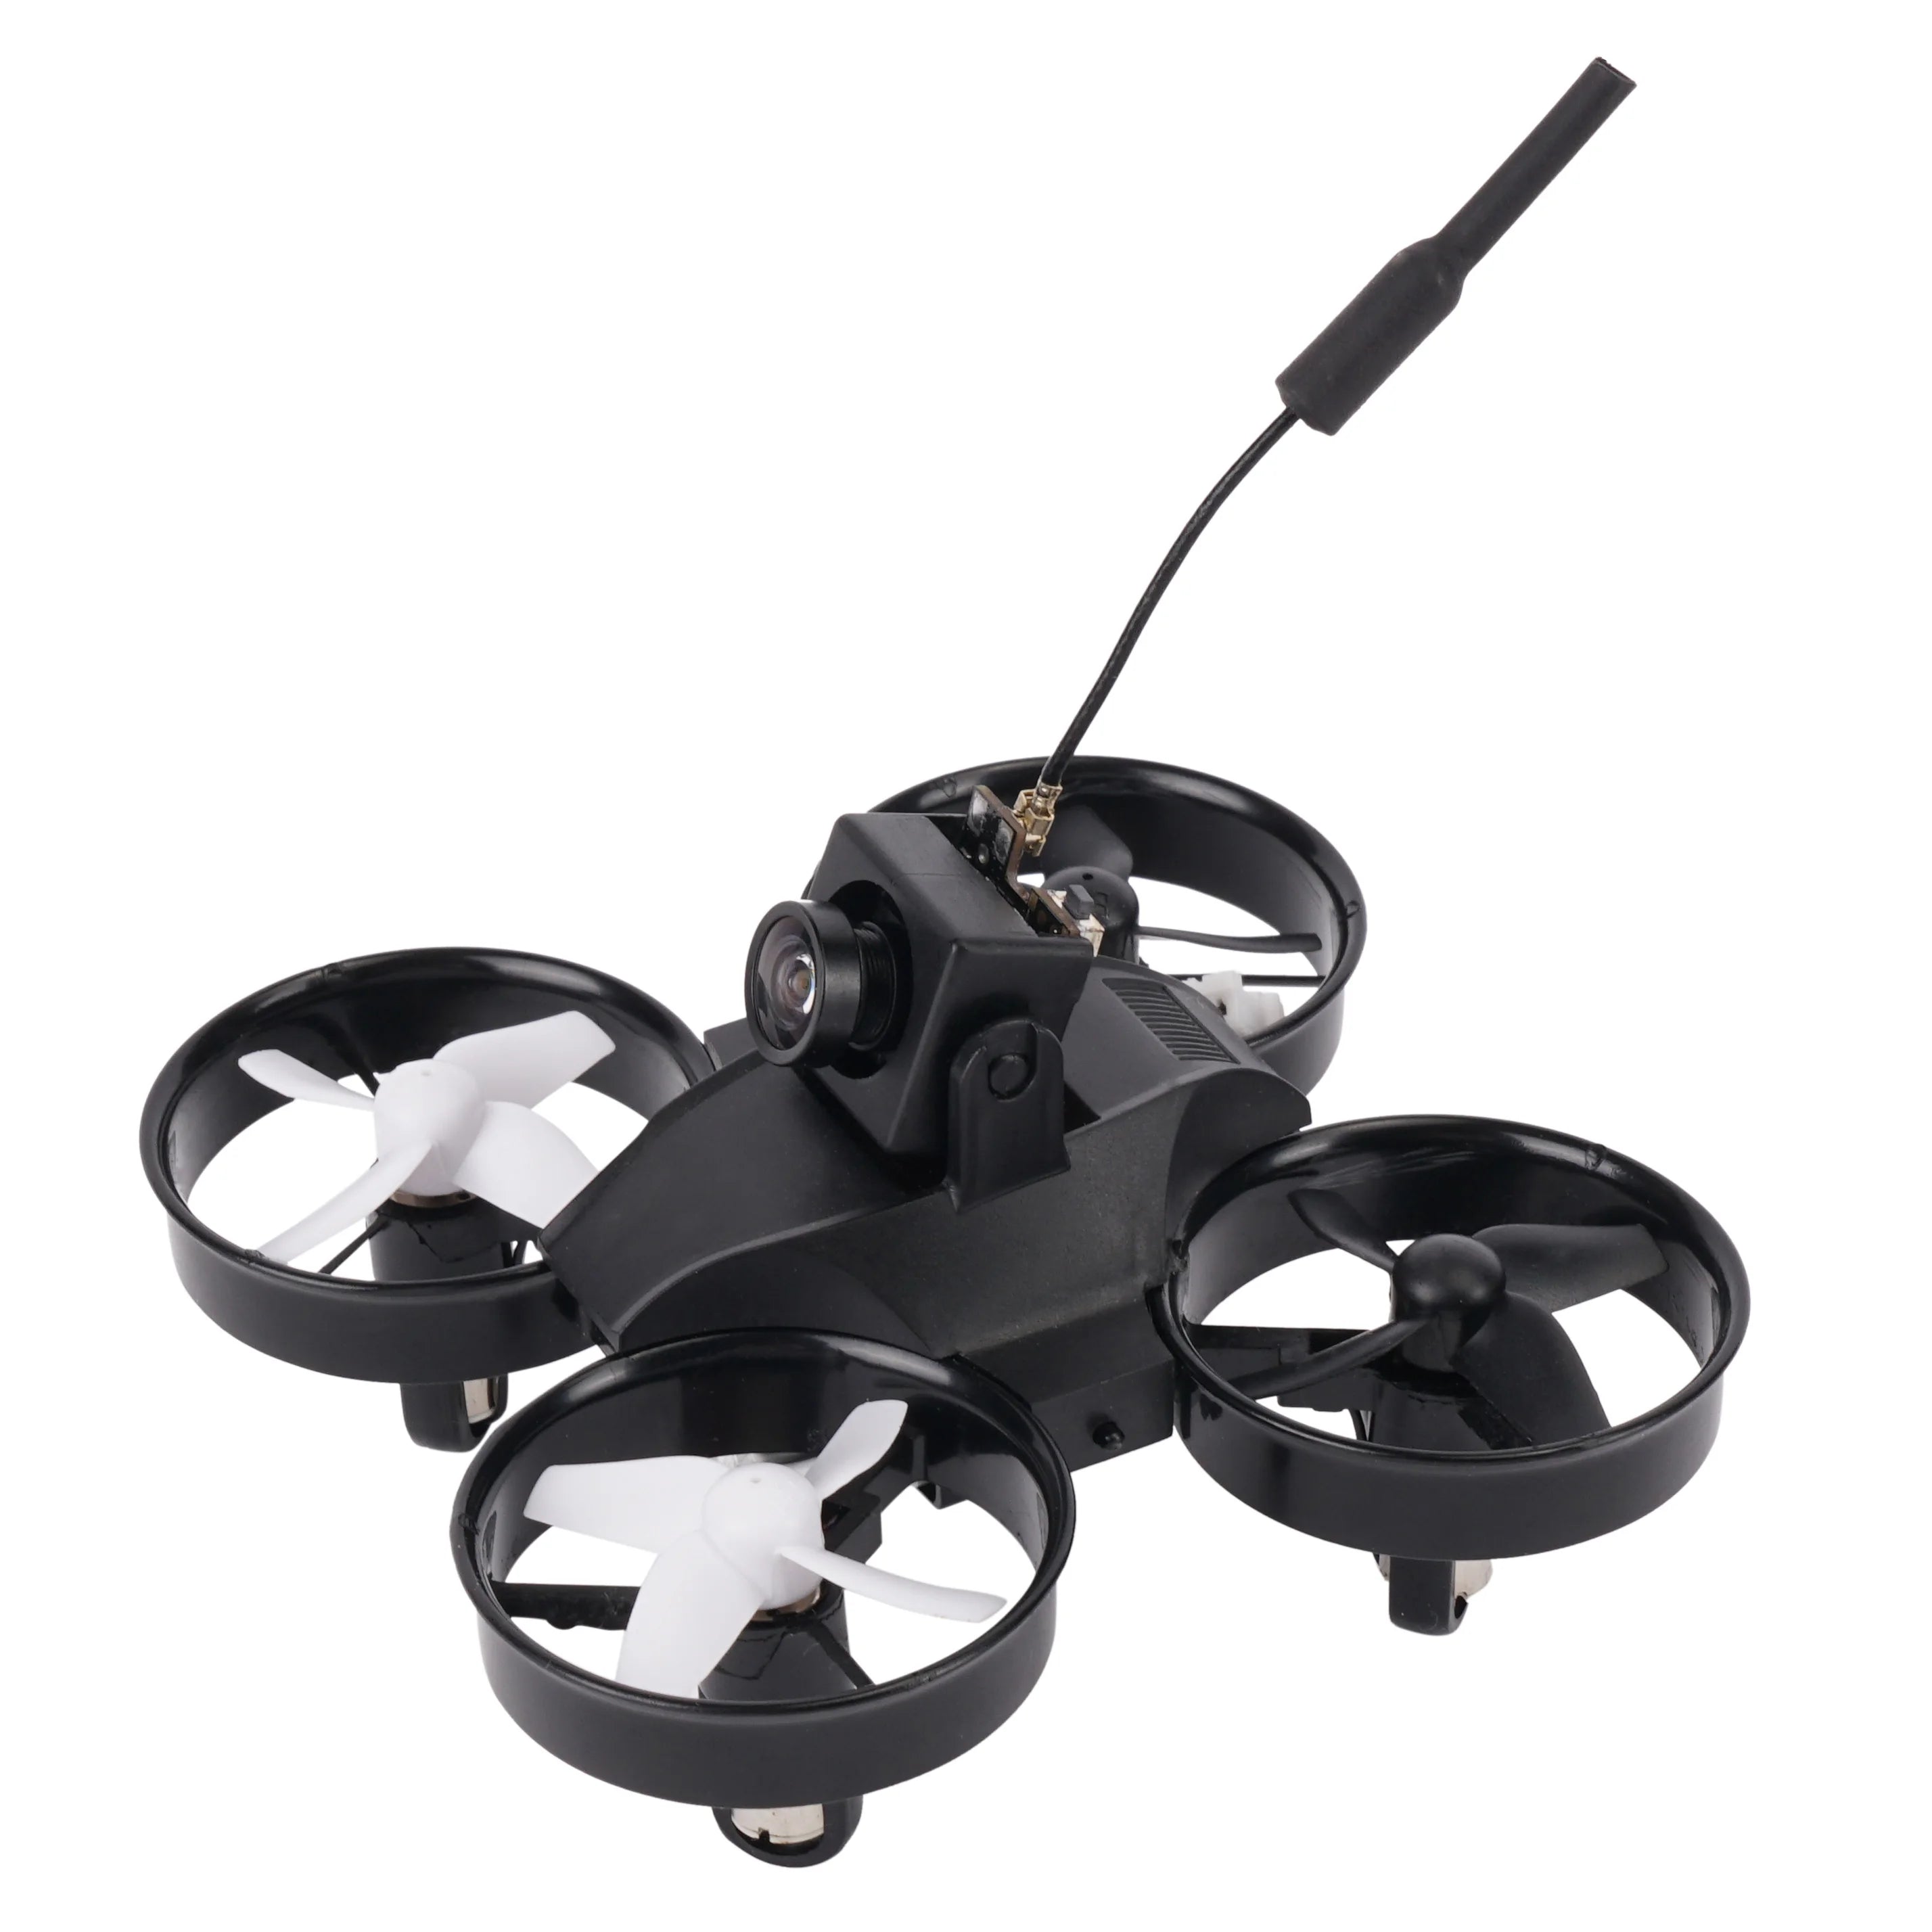 RTF Micro FPV RC Racing Drone, 3.FPV Goggles: comes with a resolution of 480*320 brightness LCD